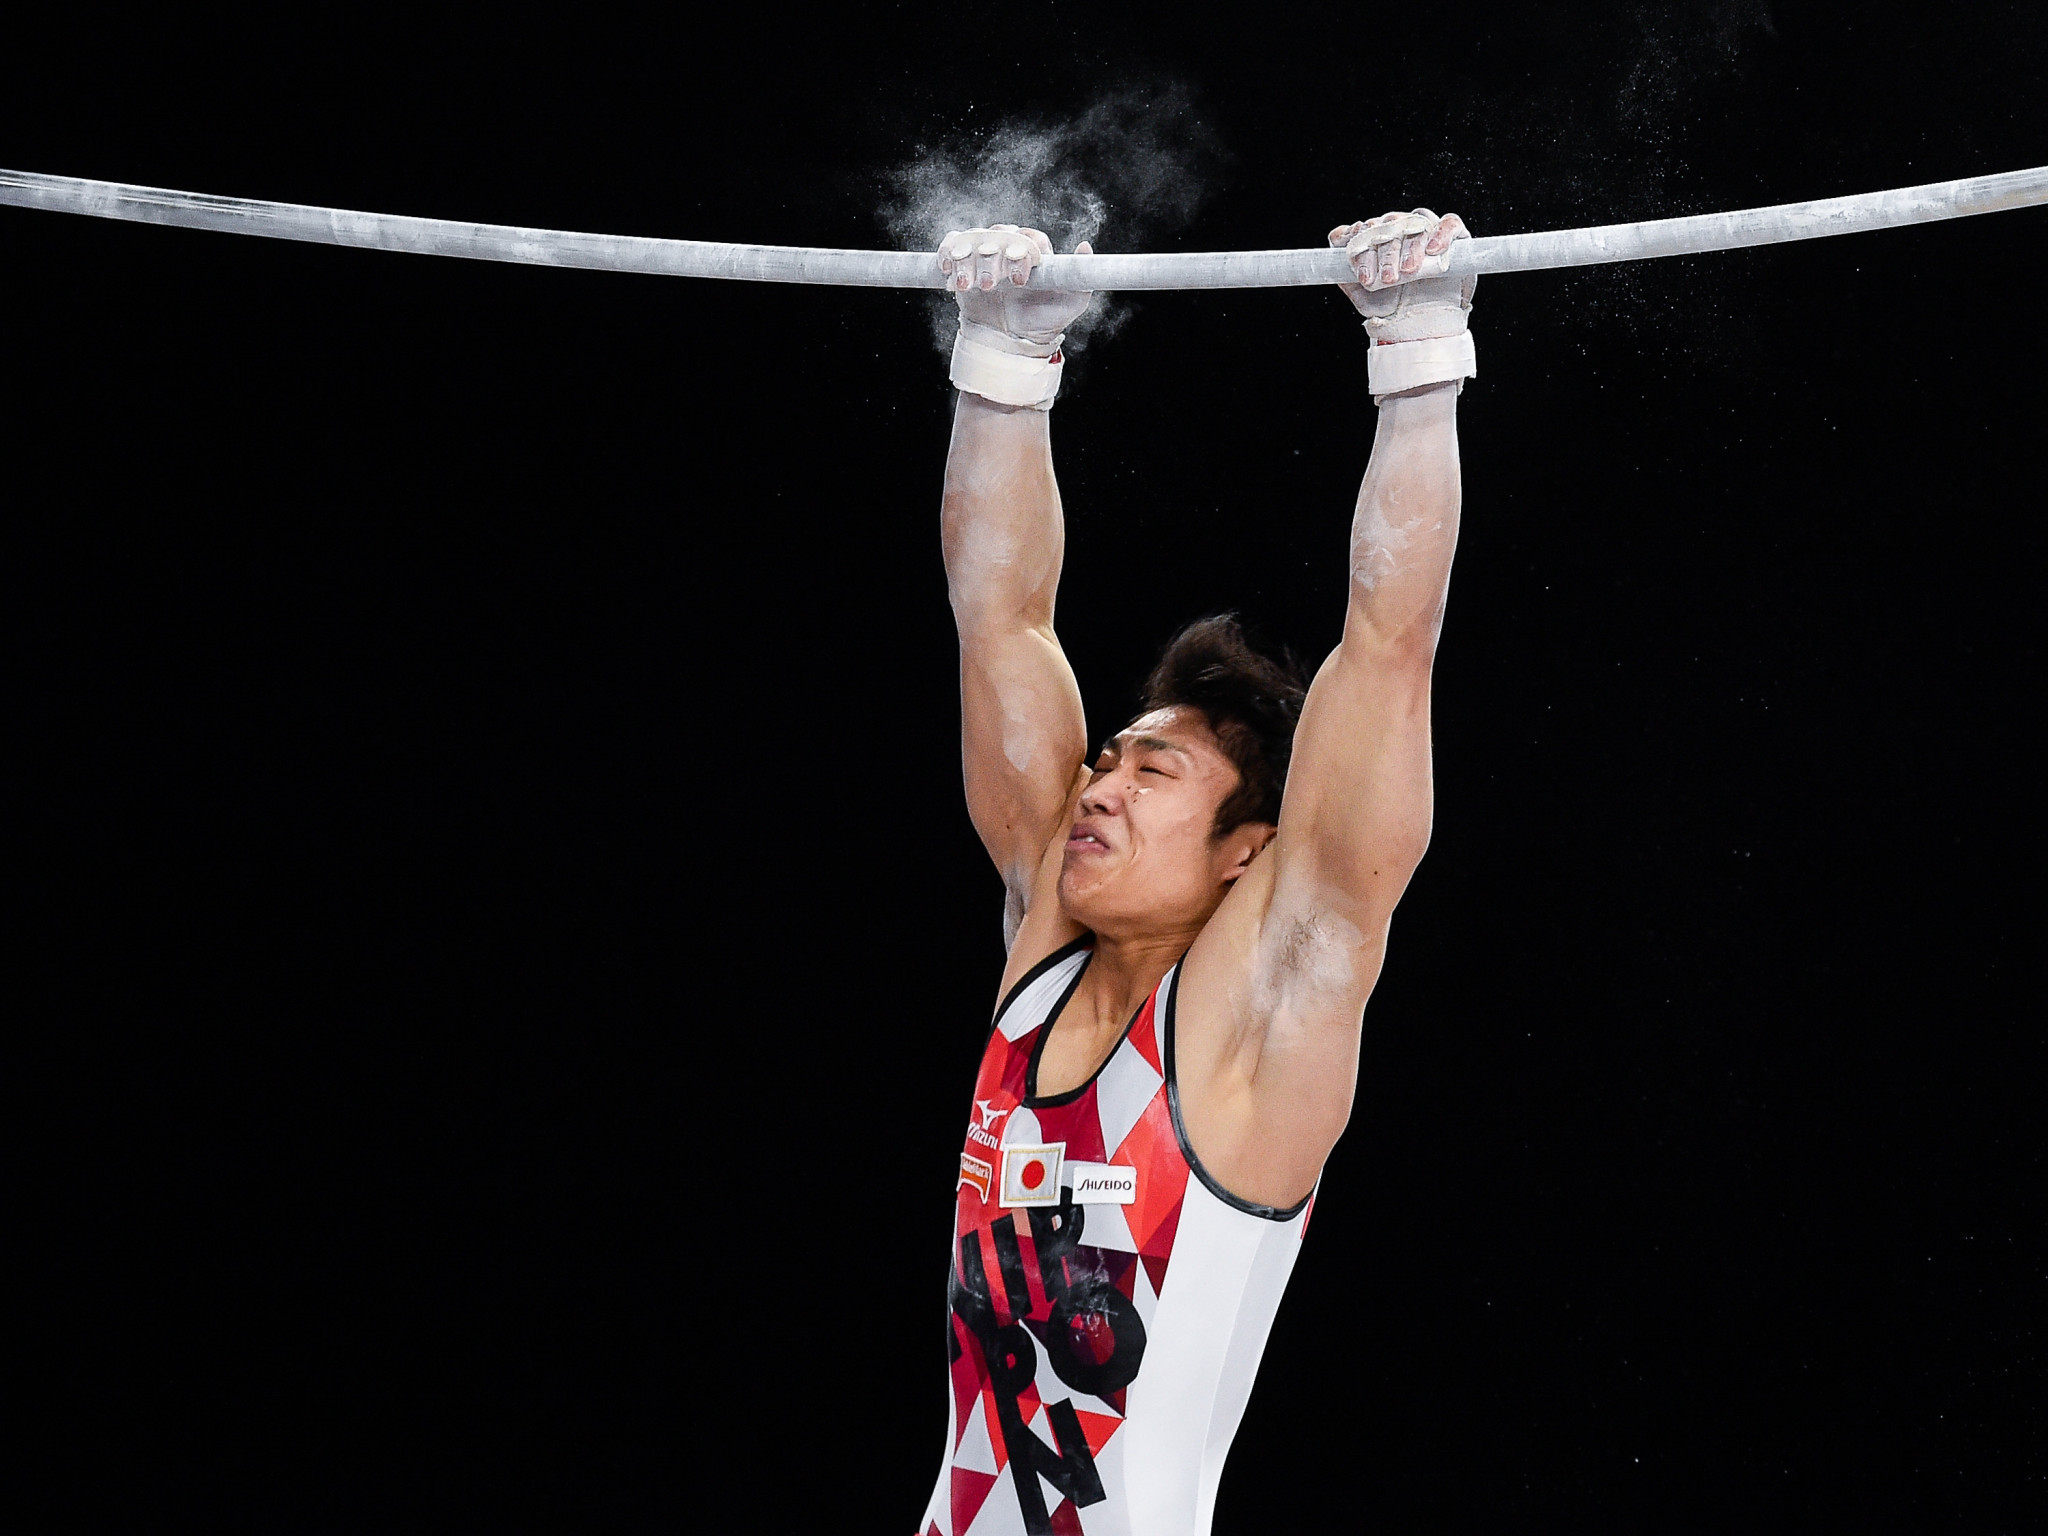 Hidetaka Miyachi won the men's high bar by just 0.3 execution points ©Getty Images